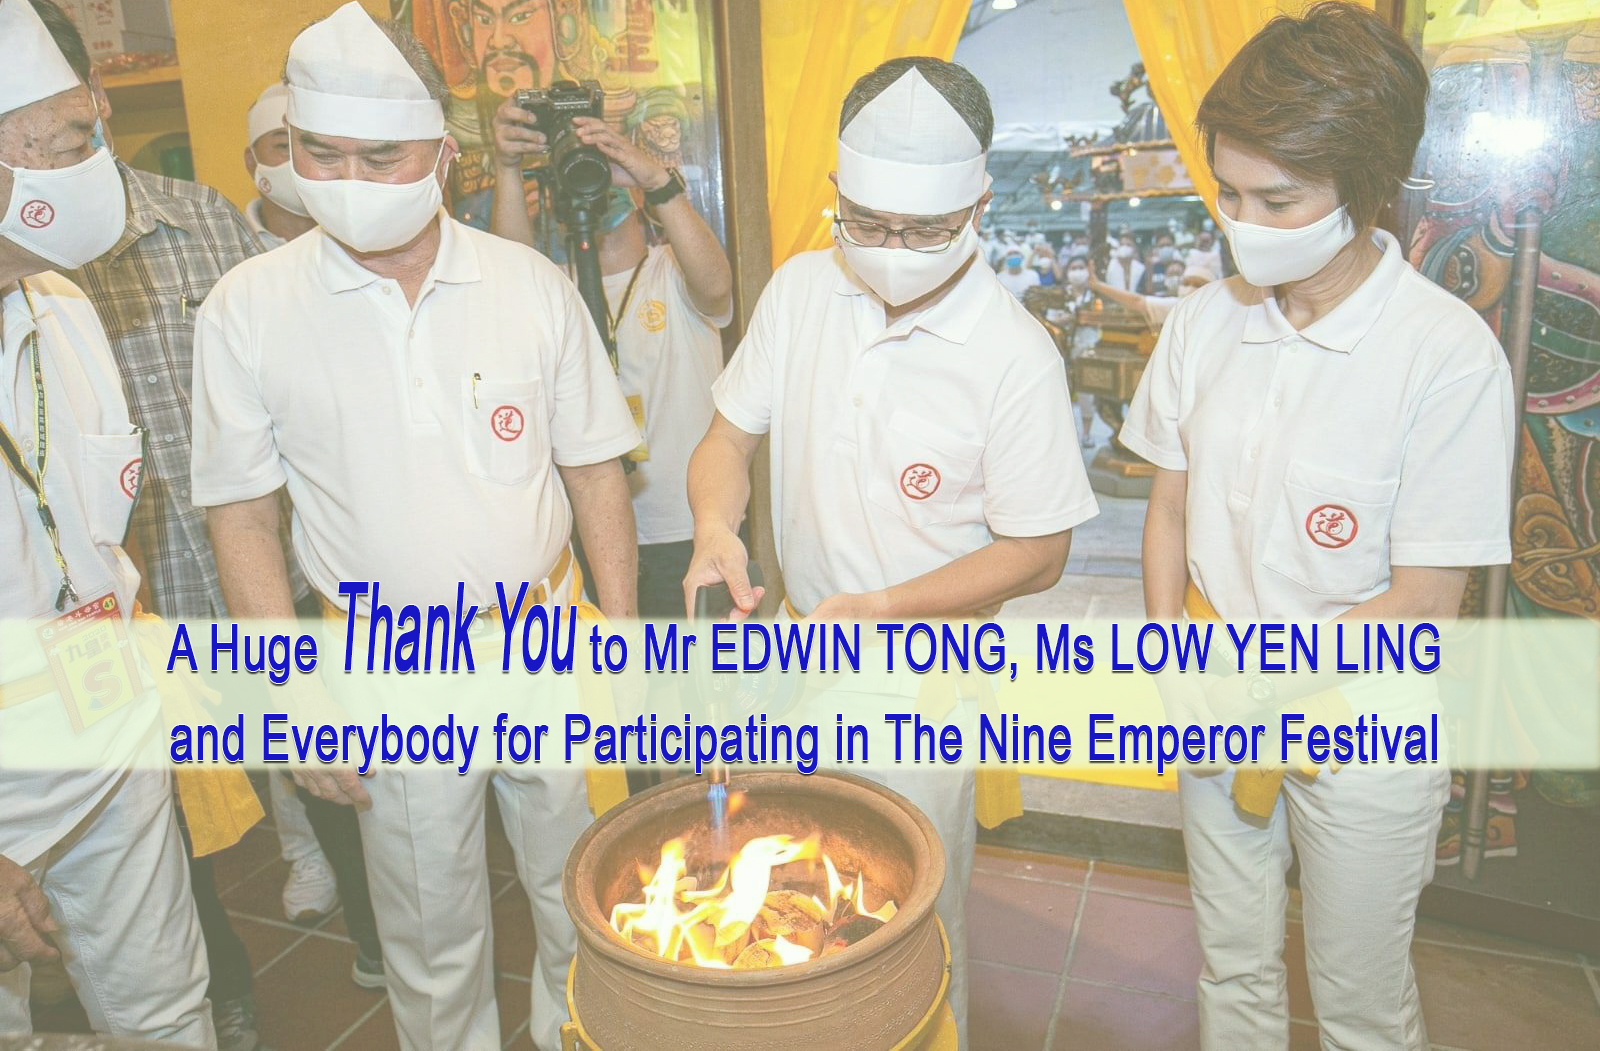 A Huge Thank You to Mr Edwin Tong, Ms Low Yen Ling and Everybody for Participating in The Nine Emperor Festival